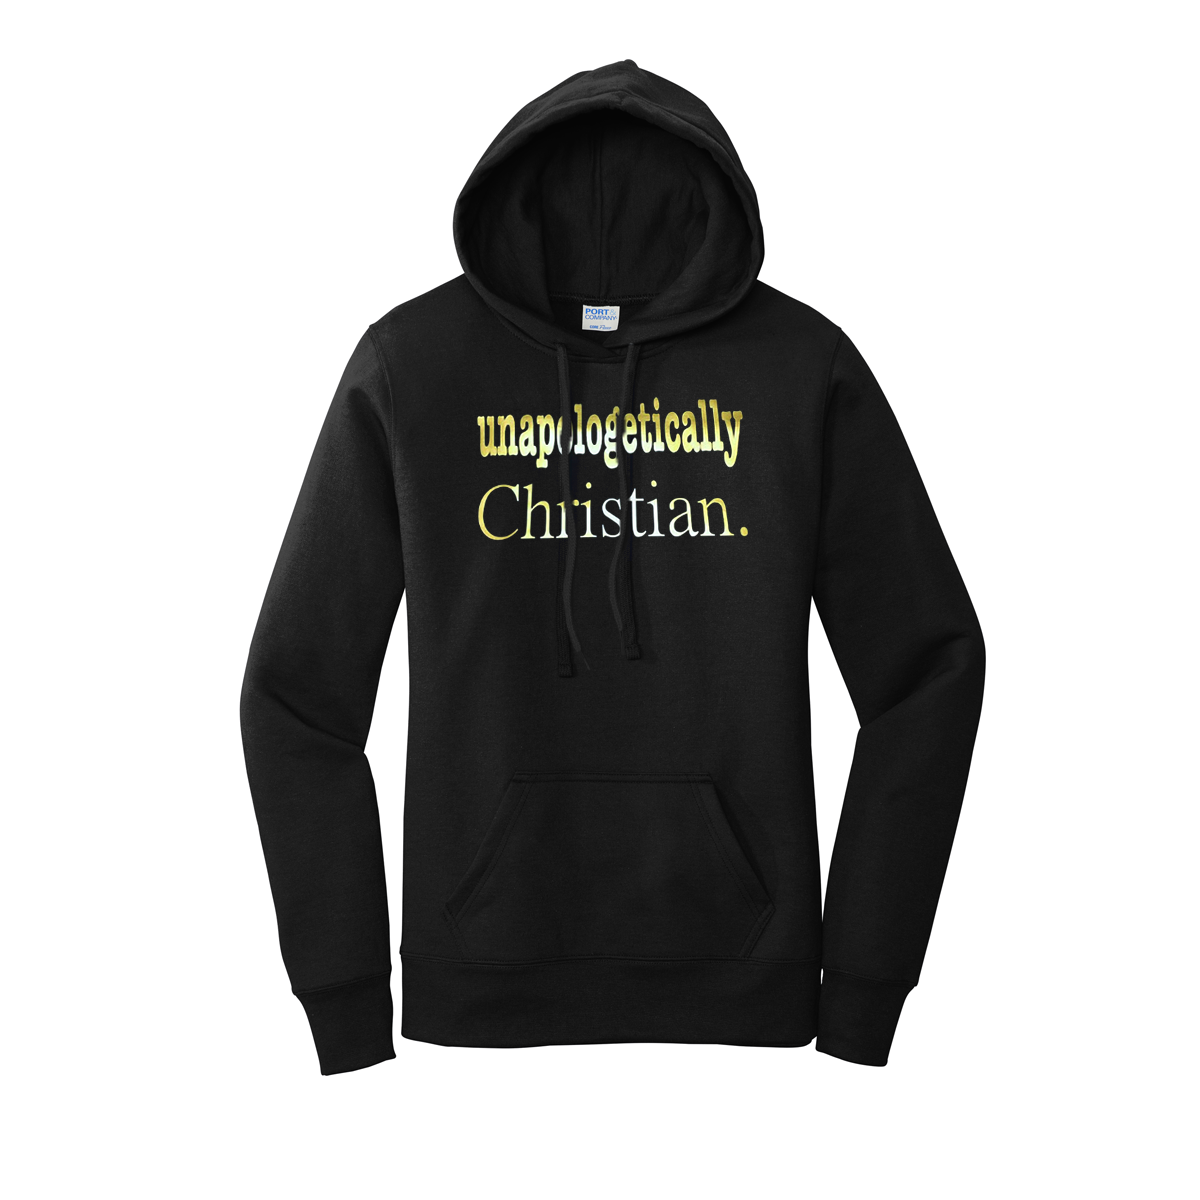 'Unapologetically Christian' Women's Hoodie